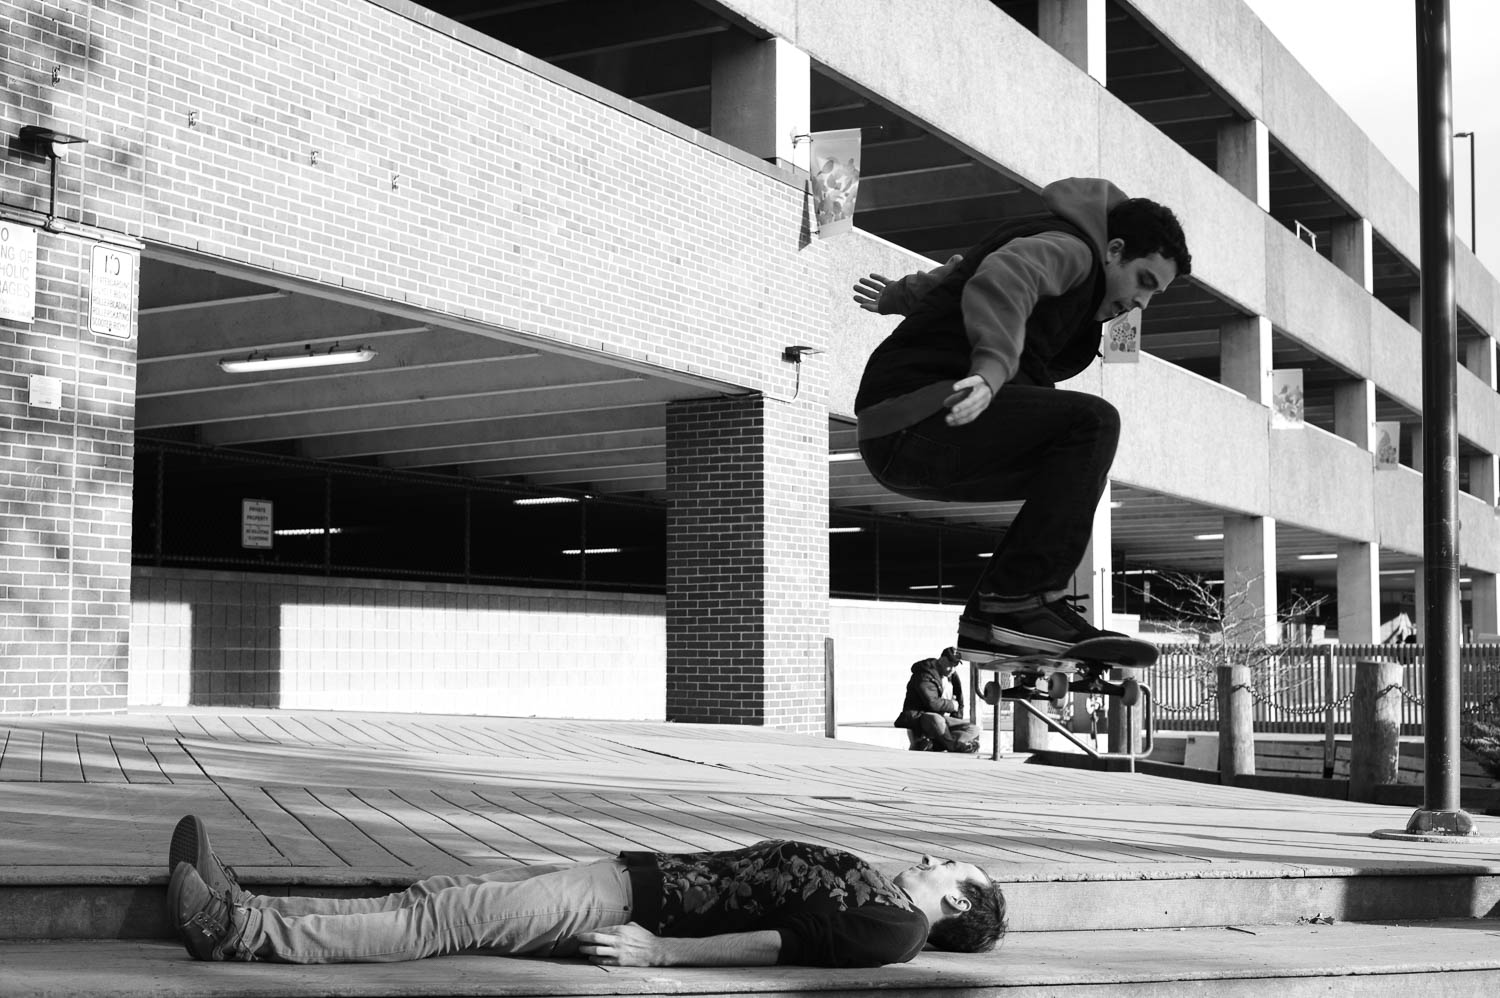 A skateboarder suspended in air above his friend, who is lying down and squinting